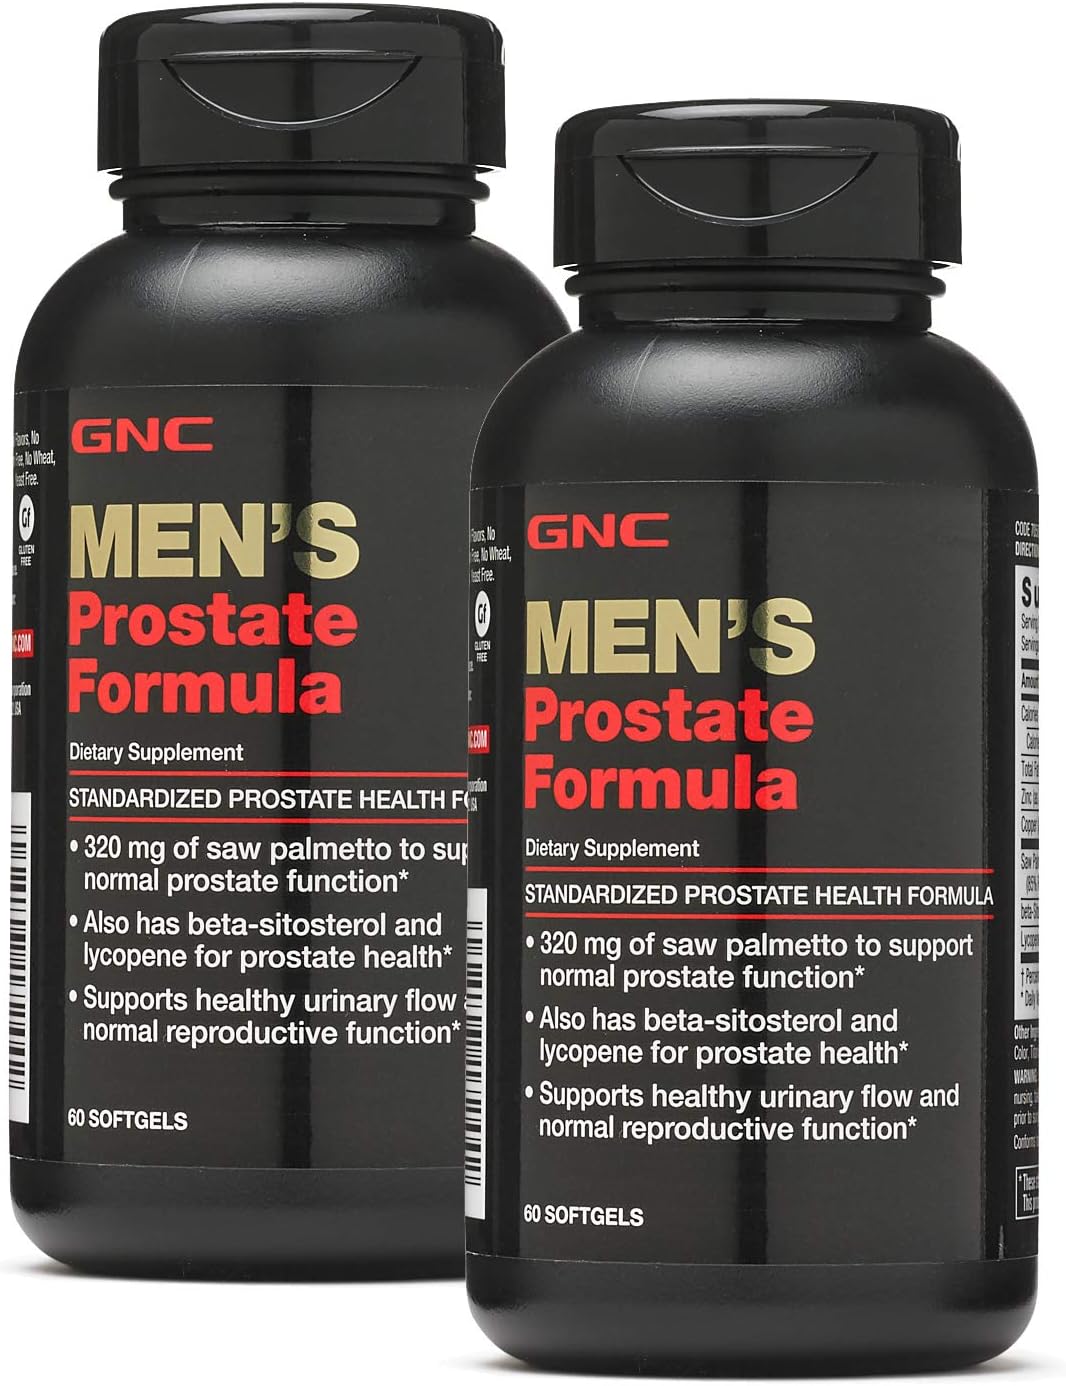 GNC Mens Prostate Formula, Twin Pack, 60 Softgels per Bottle, Supports Normal Reproductive Function